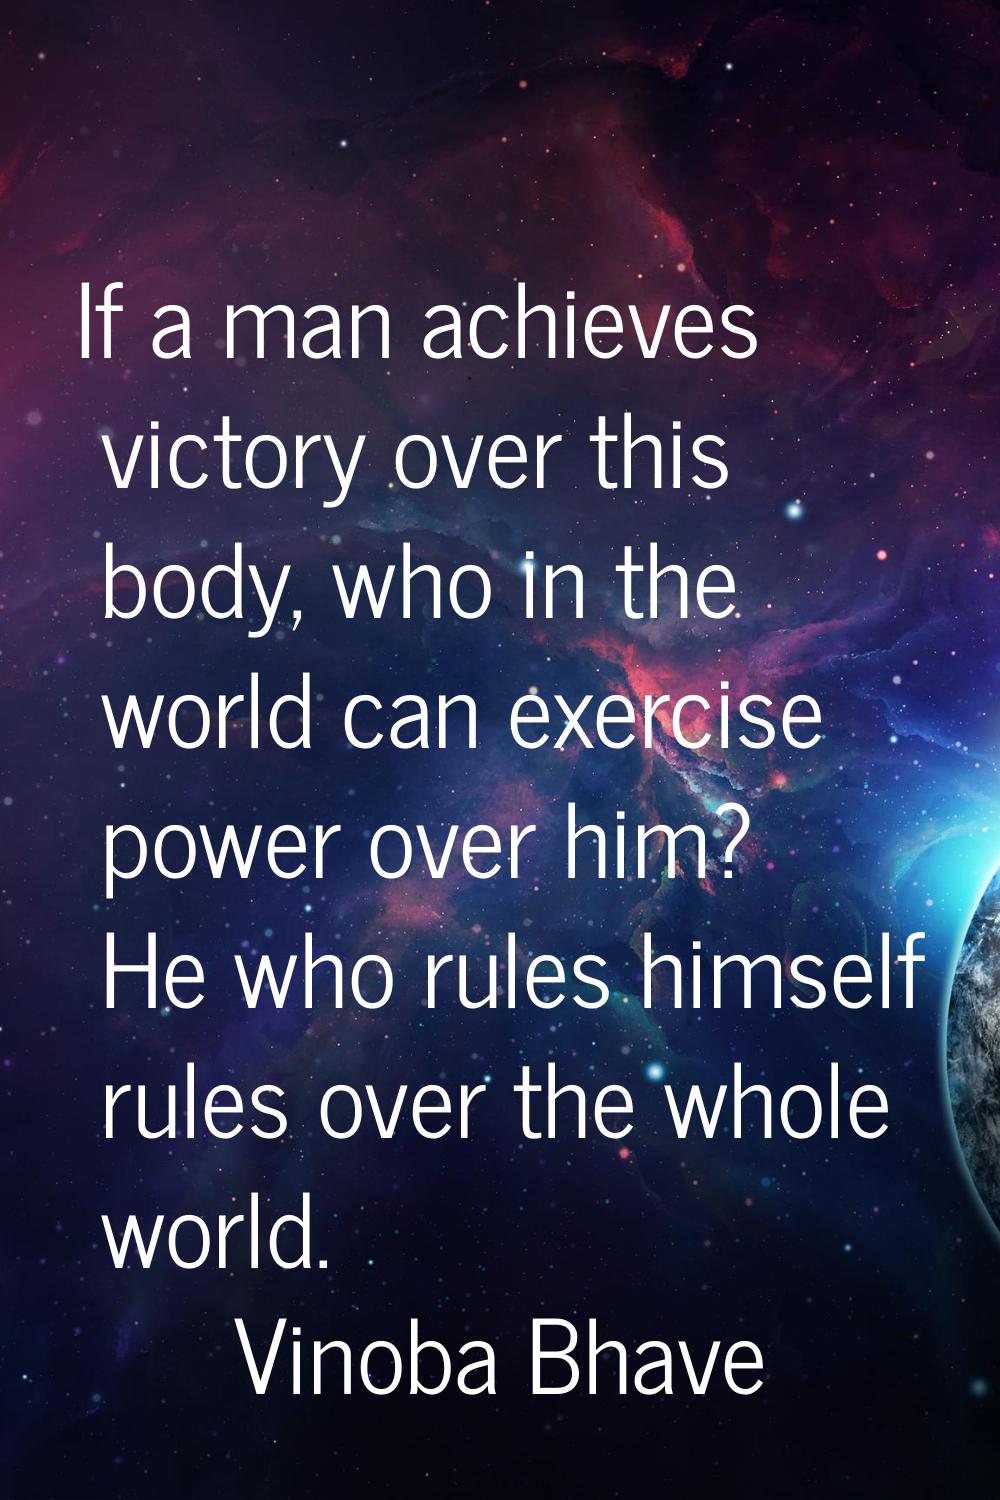 If a man achieves victory over this body, who in the world can exercise power over him? He who rule